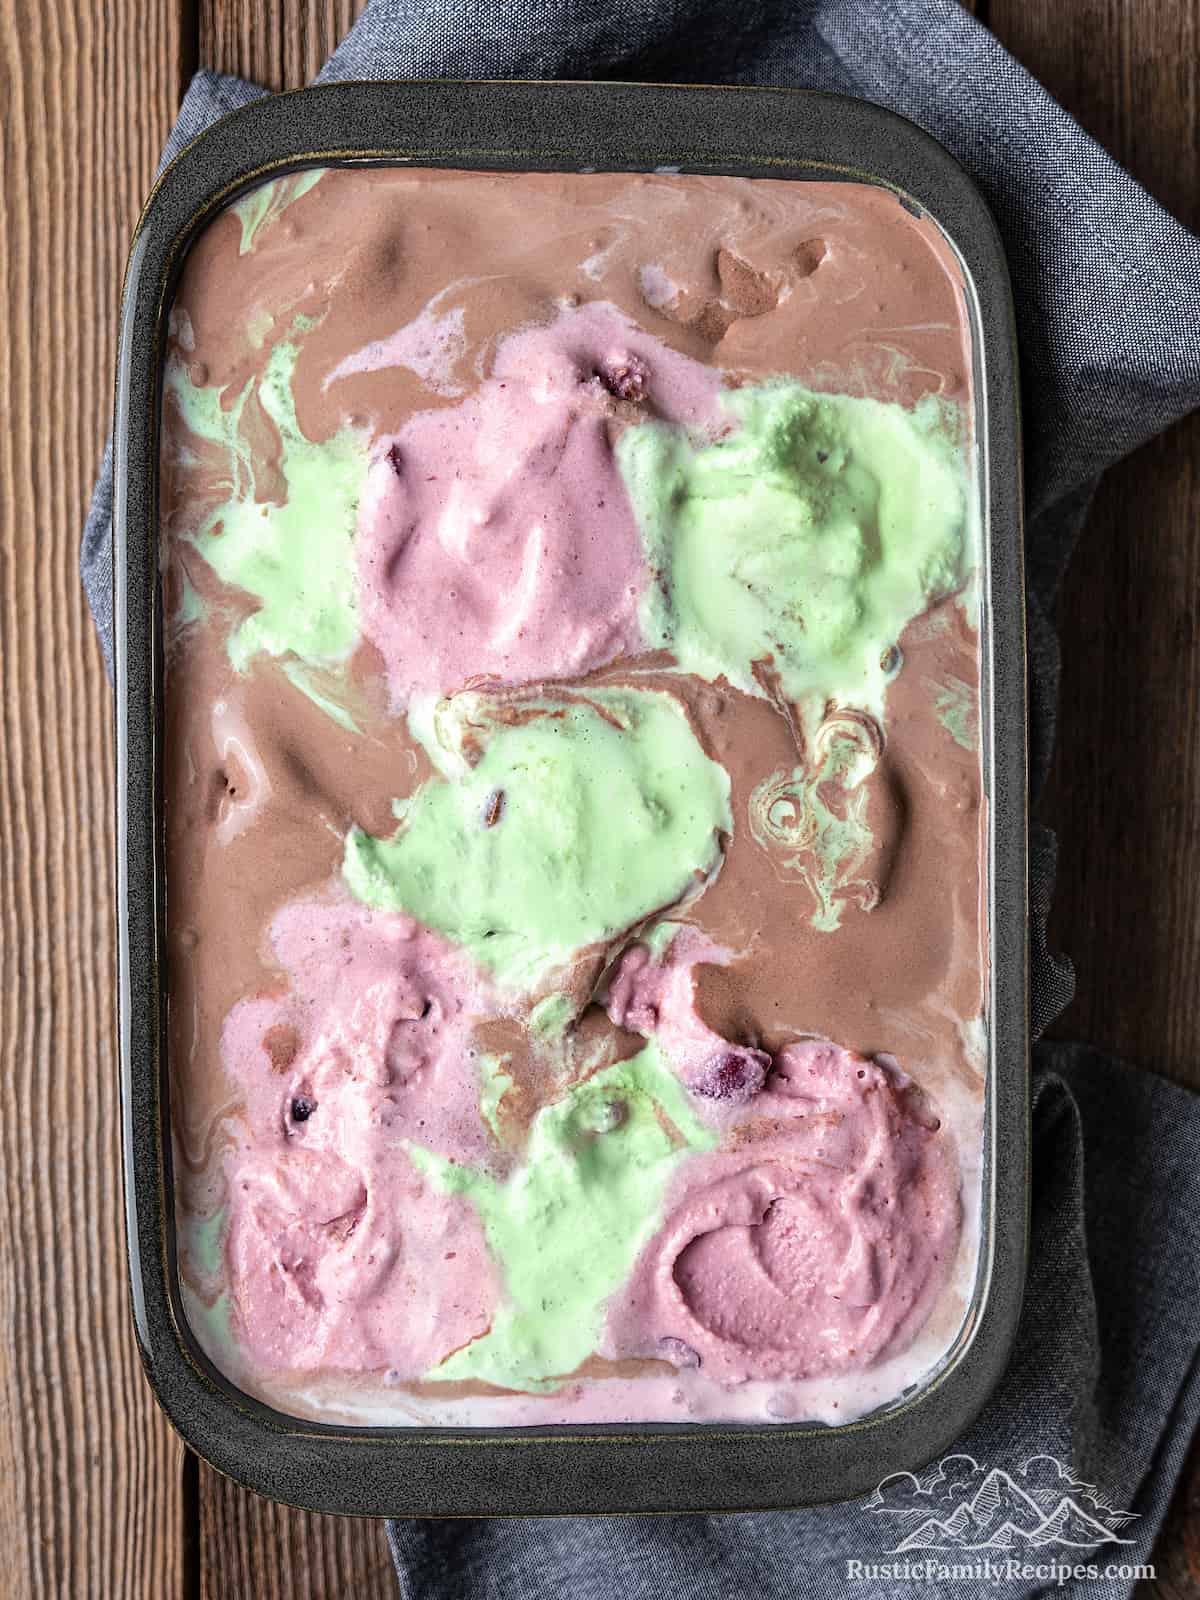 Top view of spumoni ice cream in a pan.